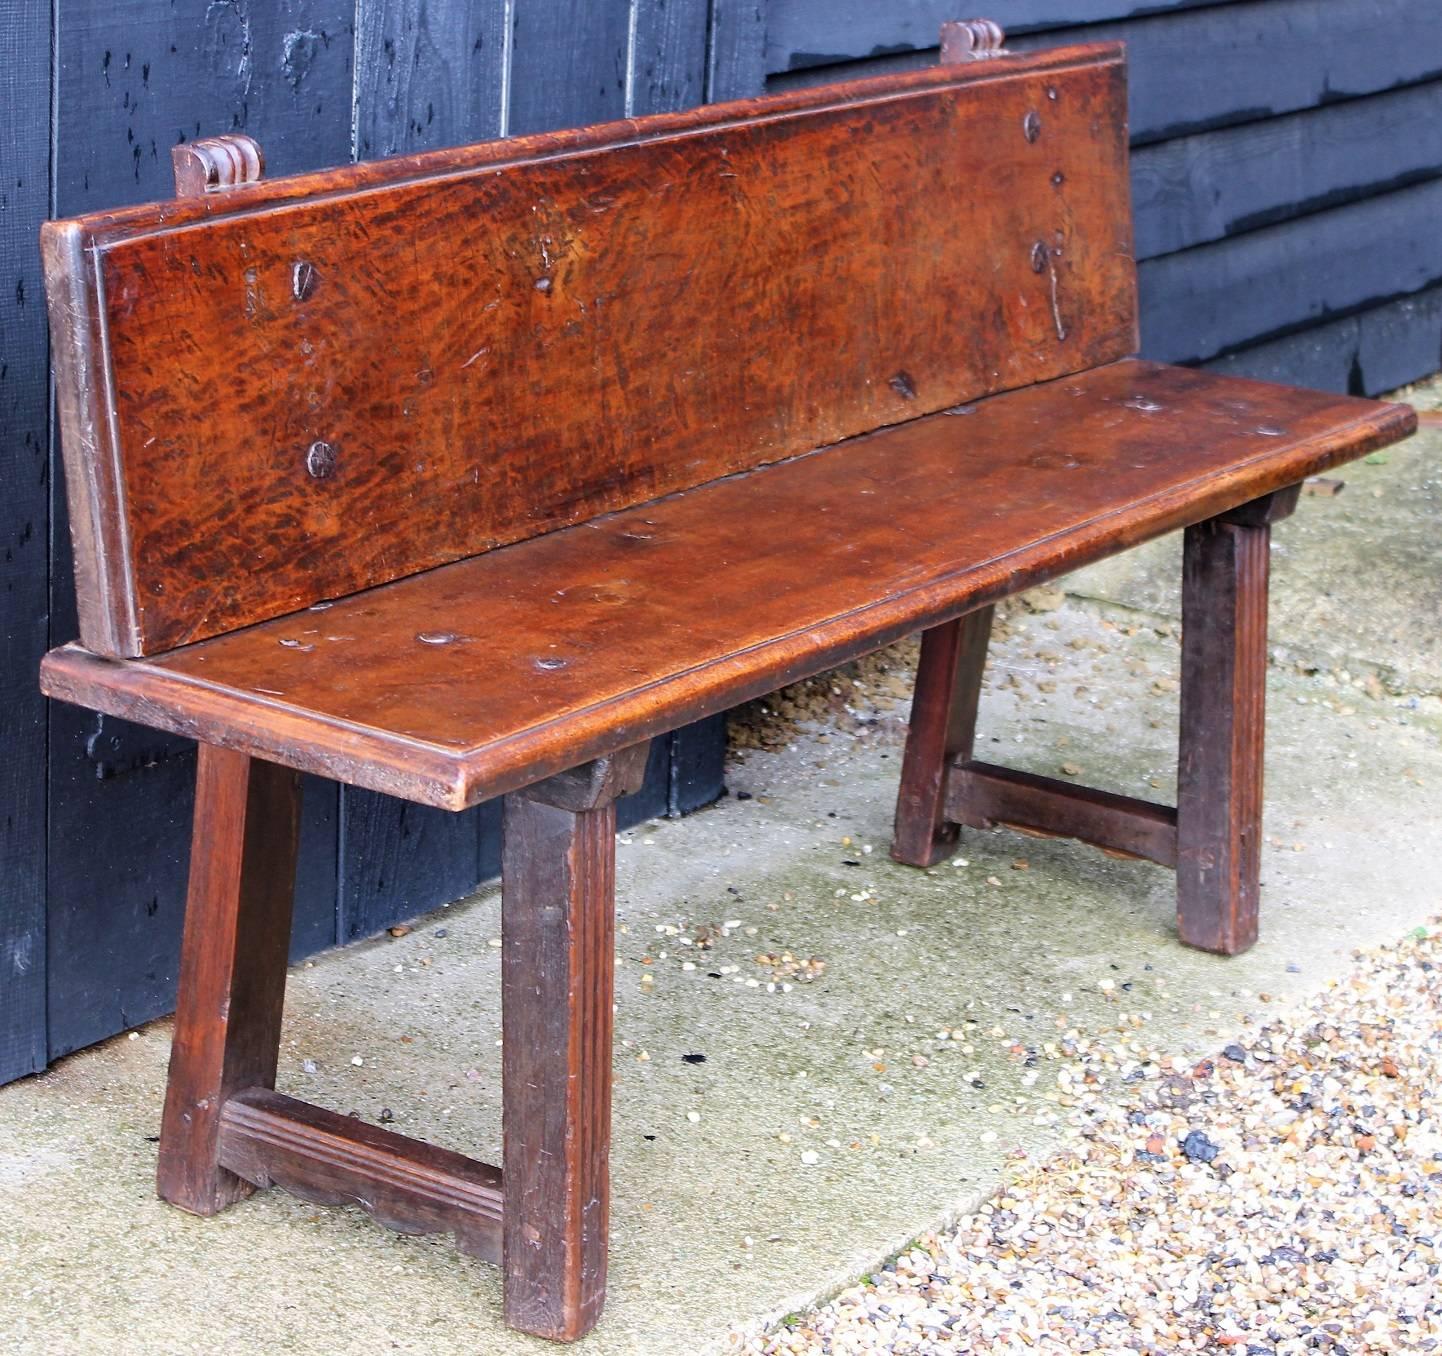 Good northern Italian walnut bench, with original iron or steel nails, of Primitive form but with some fluted details, good colour.